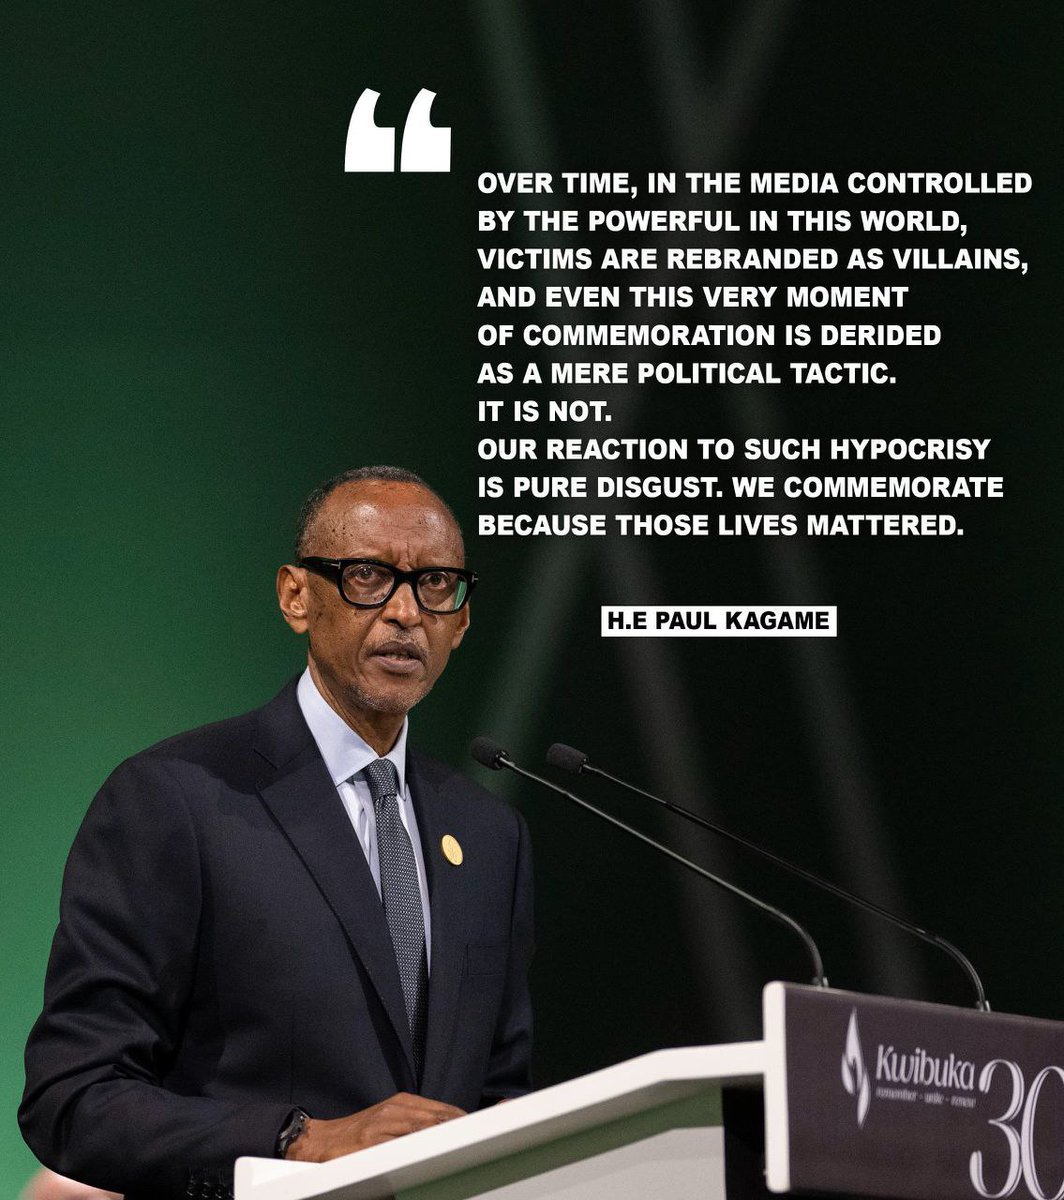 We commemorate our loved ones we lost because their lives mattered & will always matter! 😭 Attributing such moments as political stunts- publishing stories portraying victims as villains, only show the little regard we have for humanity- Sad. #Kwibuka30 #KwibukaTwiyubaka